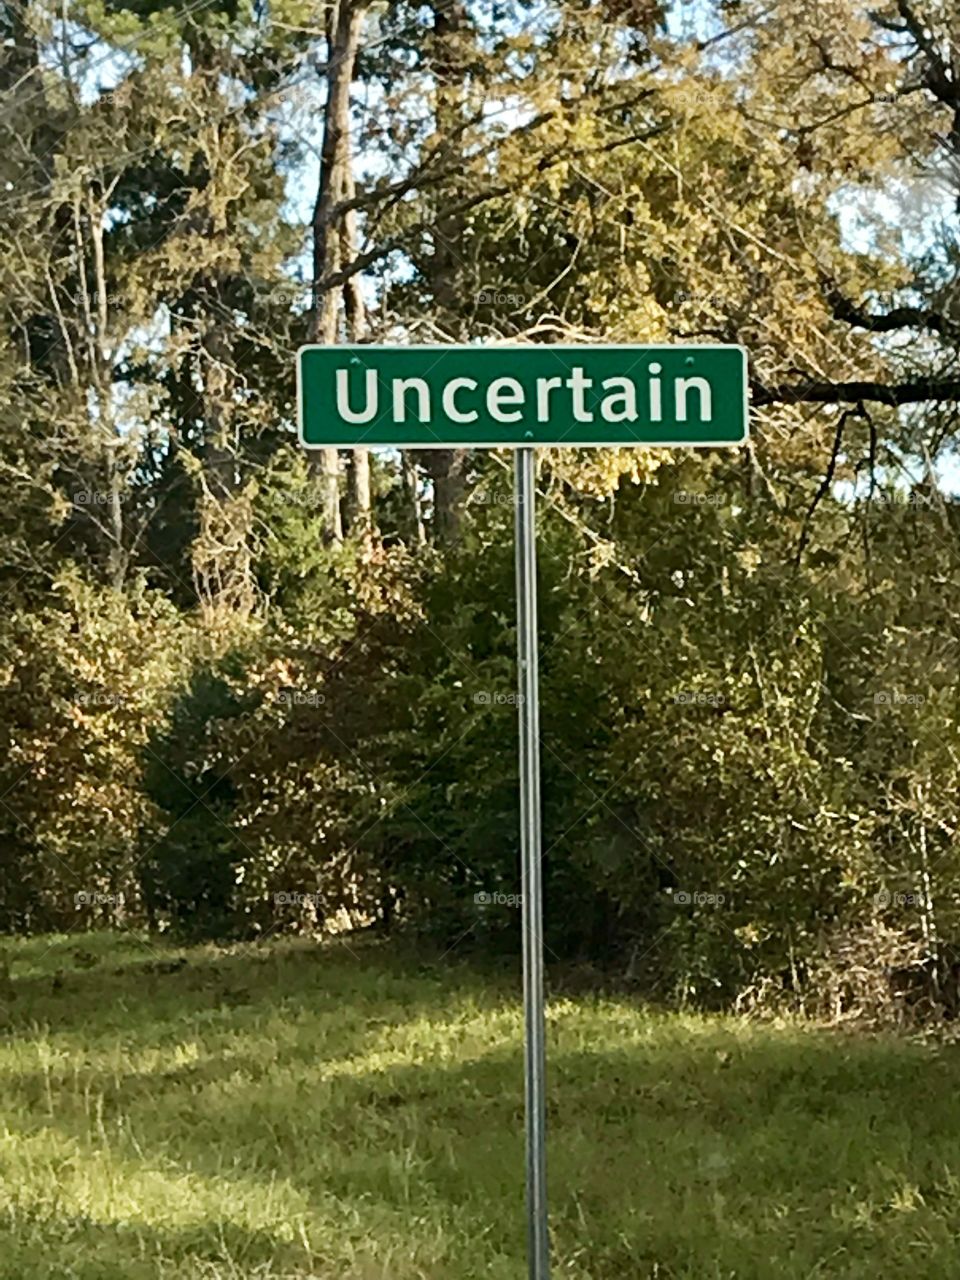 Road Sign for City Town Uncertain in East Texas 